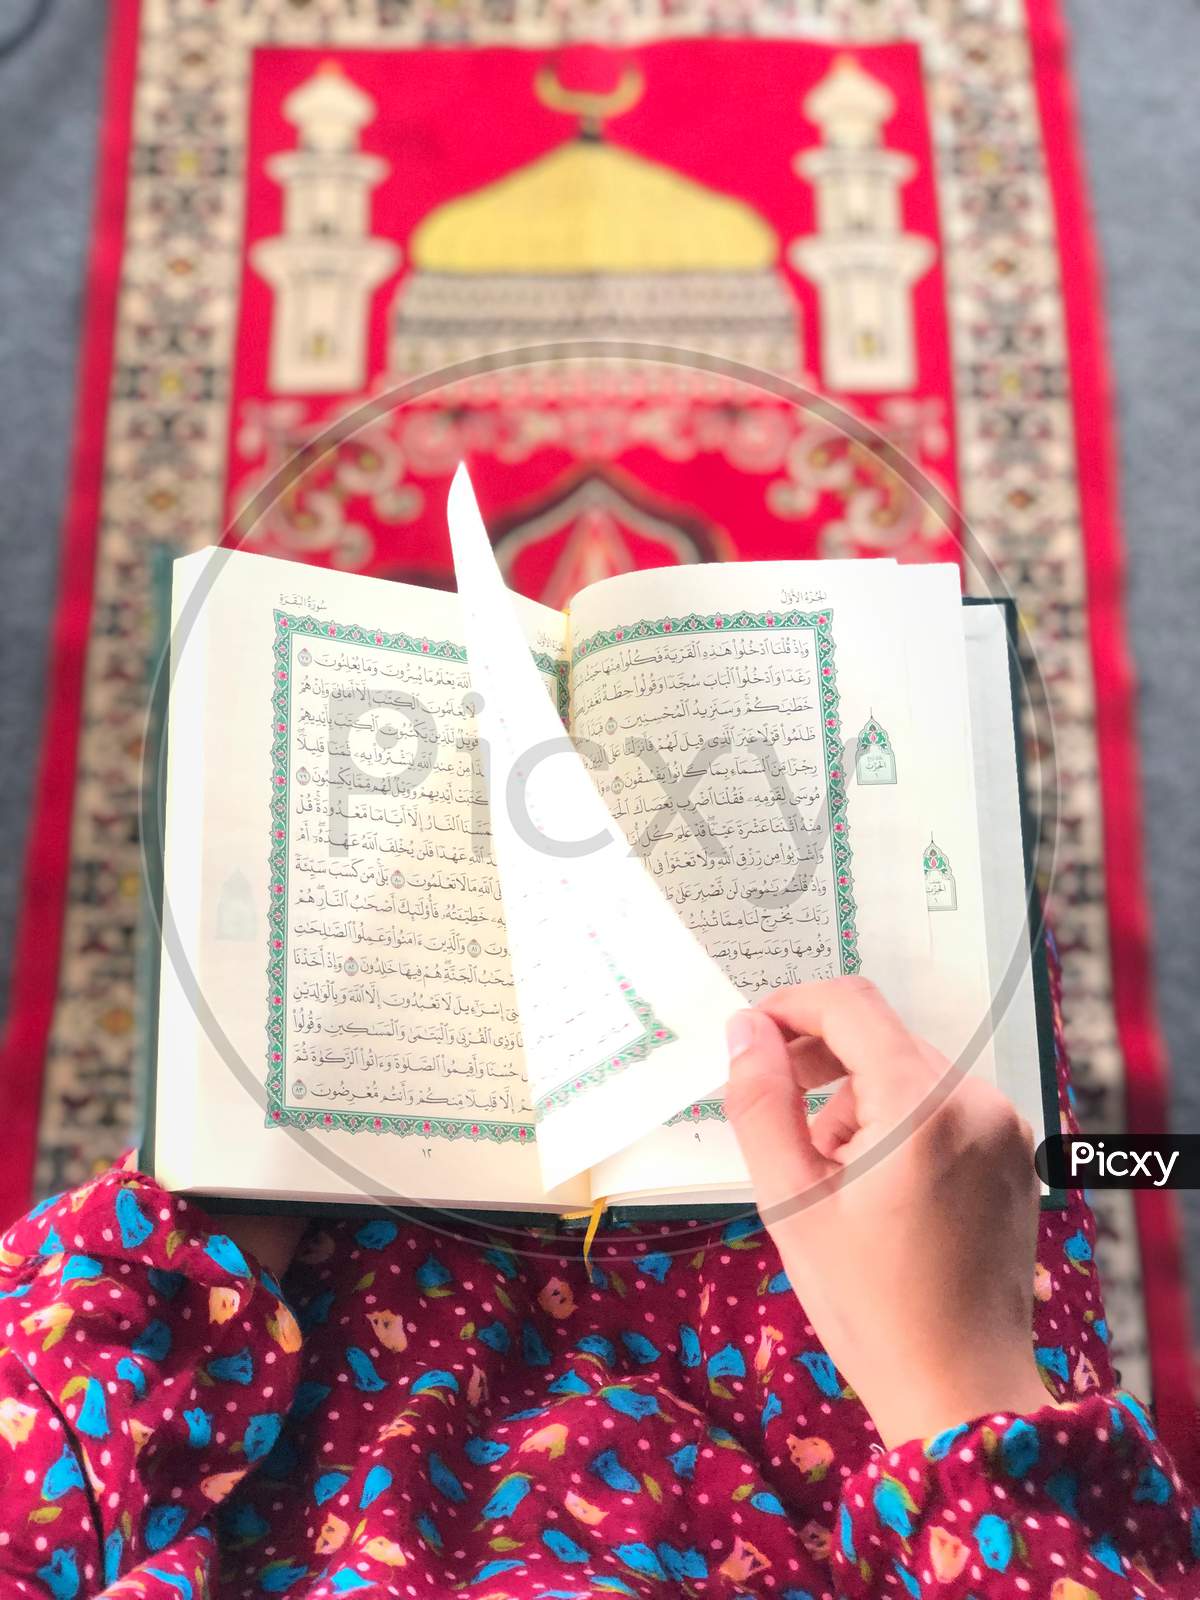 A,Woman,Reading,The,Quran,On,A,Prayer,Rug